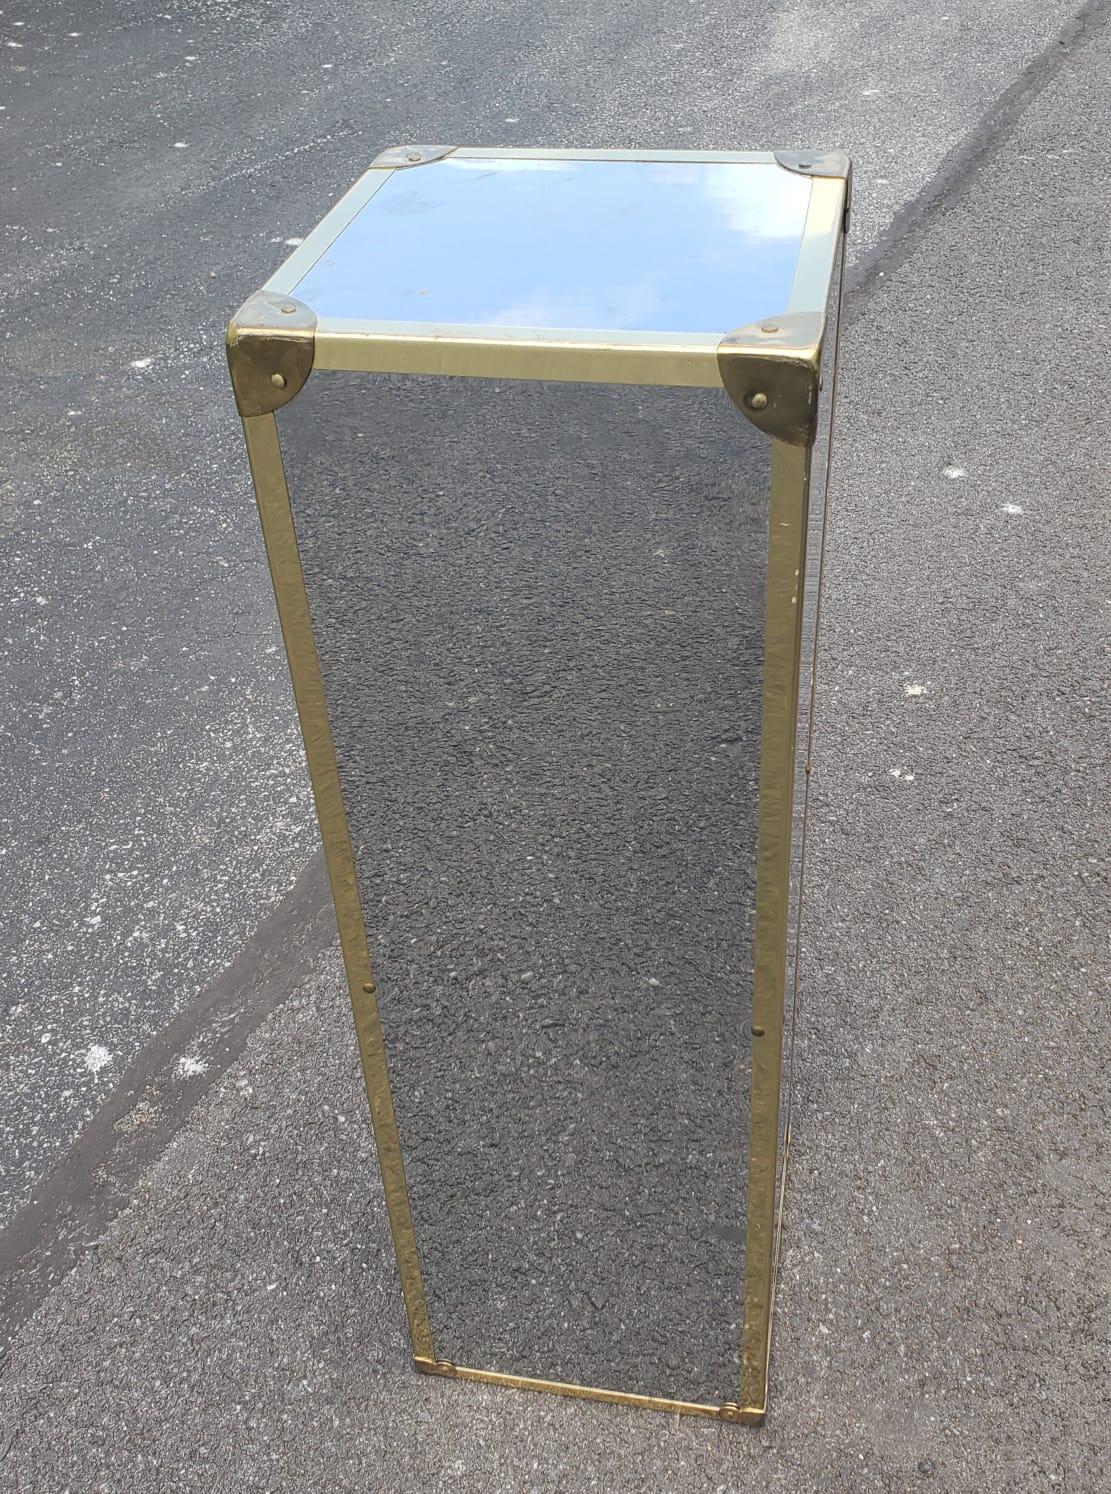 Mirrored Chrome Plated and Brass Mounted Corners Wood Pedestal / Column in good vintage condition. Measures 10